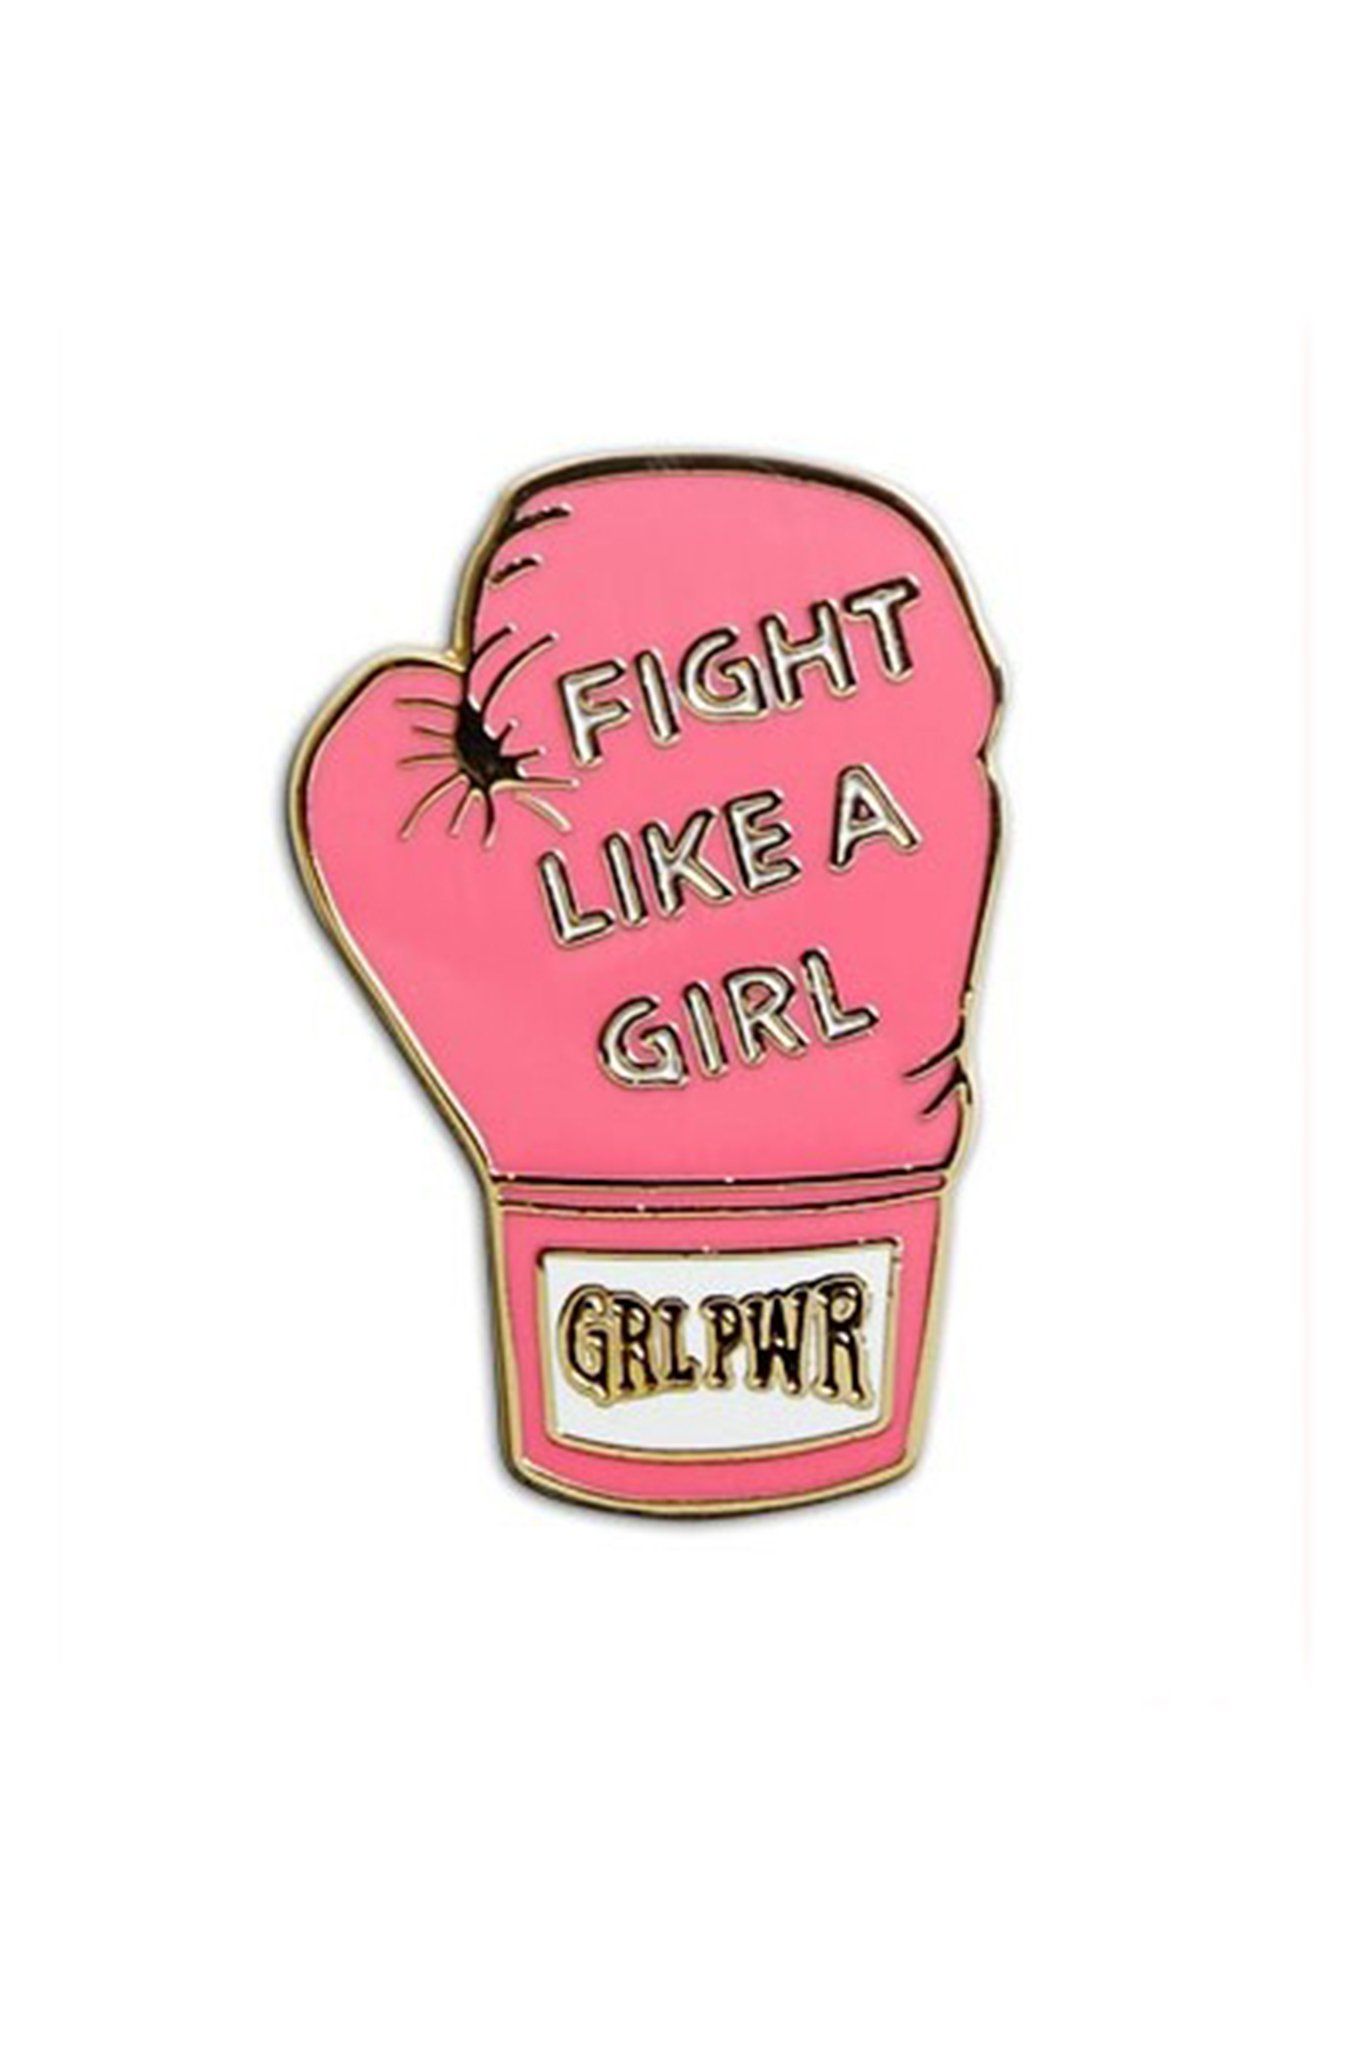 The Found Enamel Pin Fight Like a Girl. Girl power quotes, Girls be like, Fight like a girl